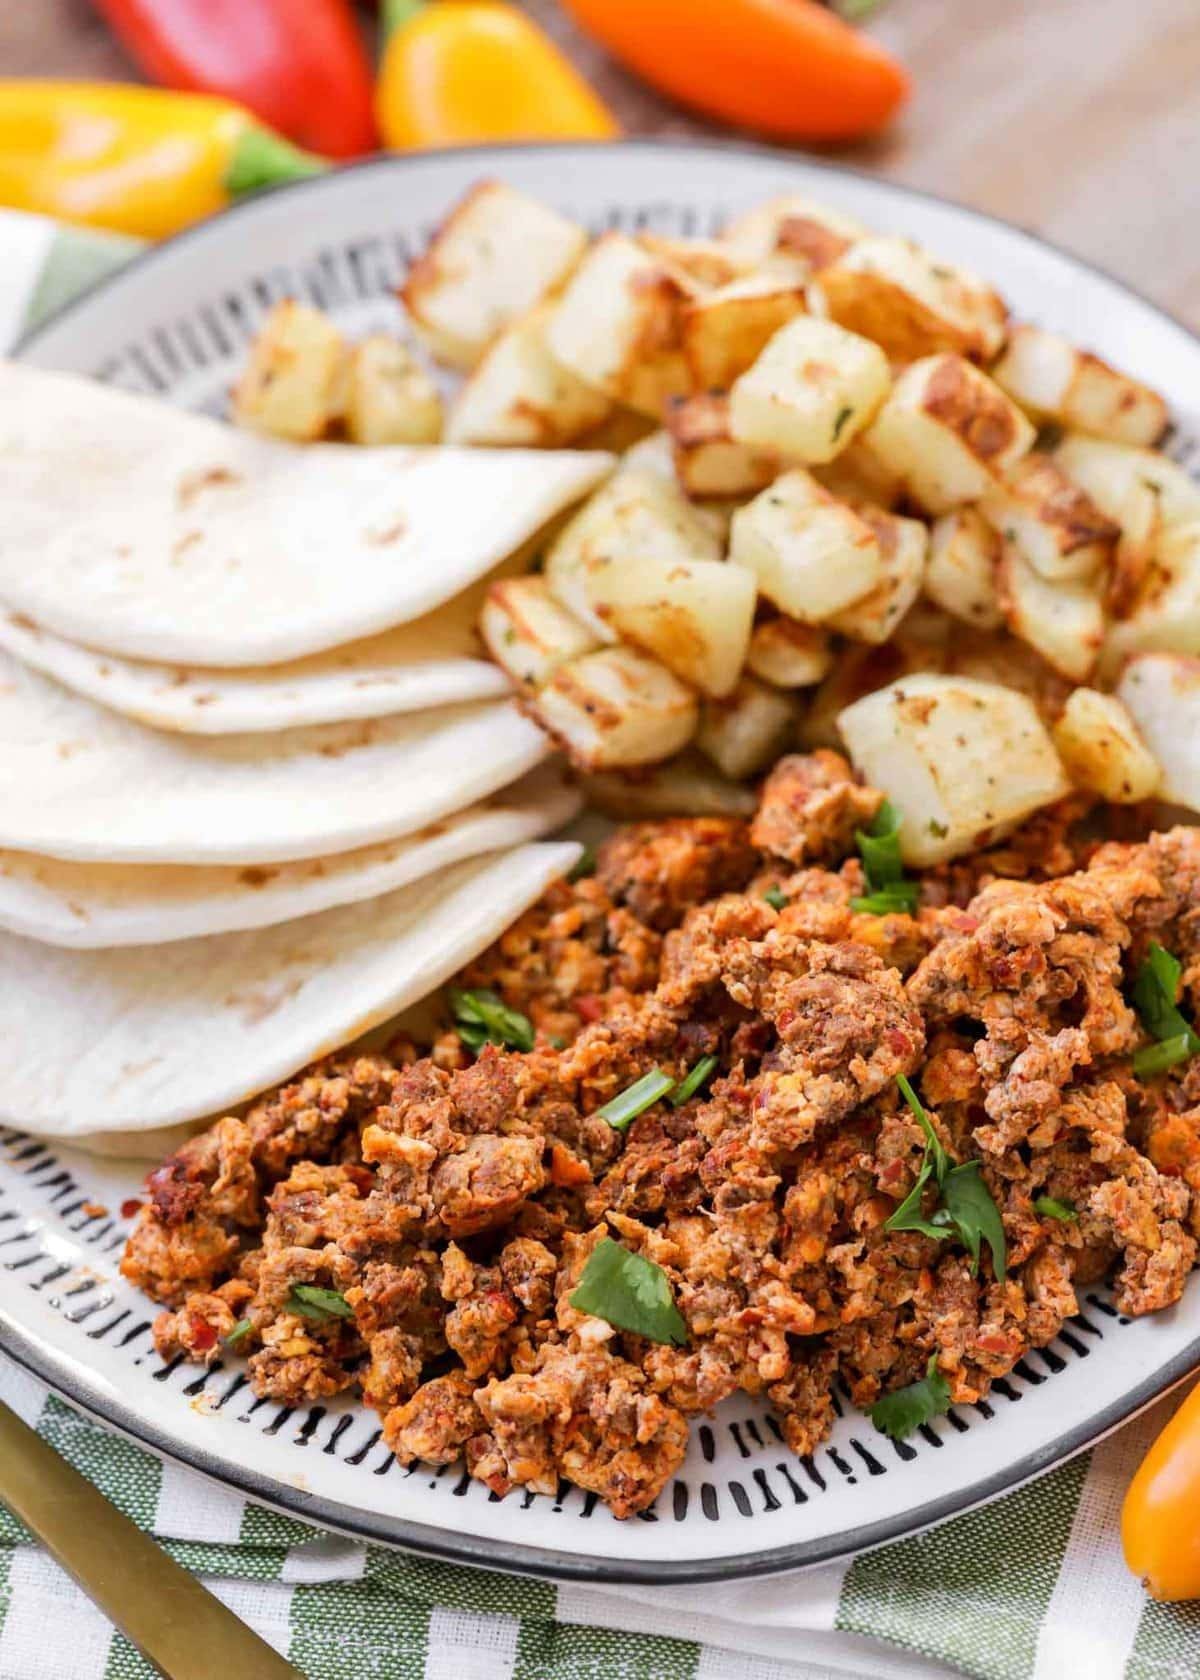 Spice Up Your Breakfast with Homemade Chorizo and Eggs